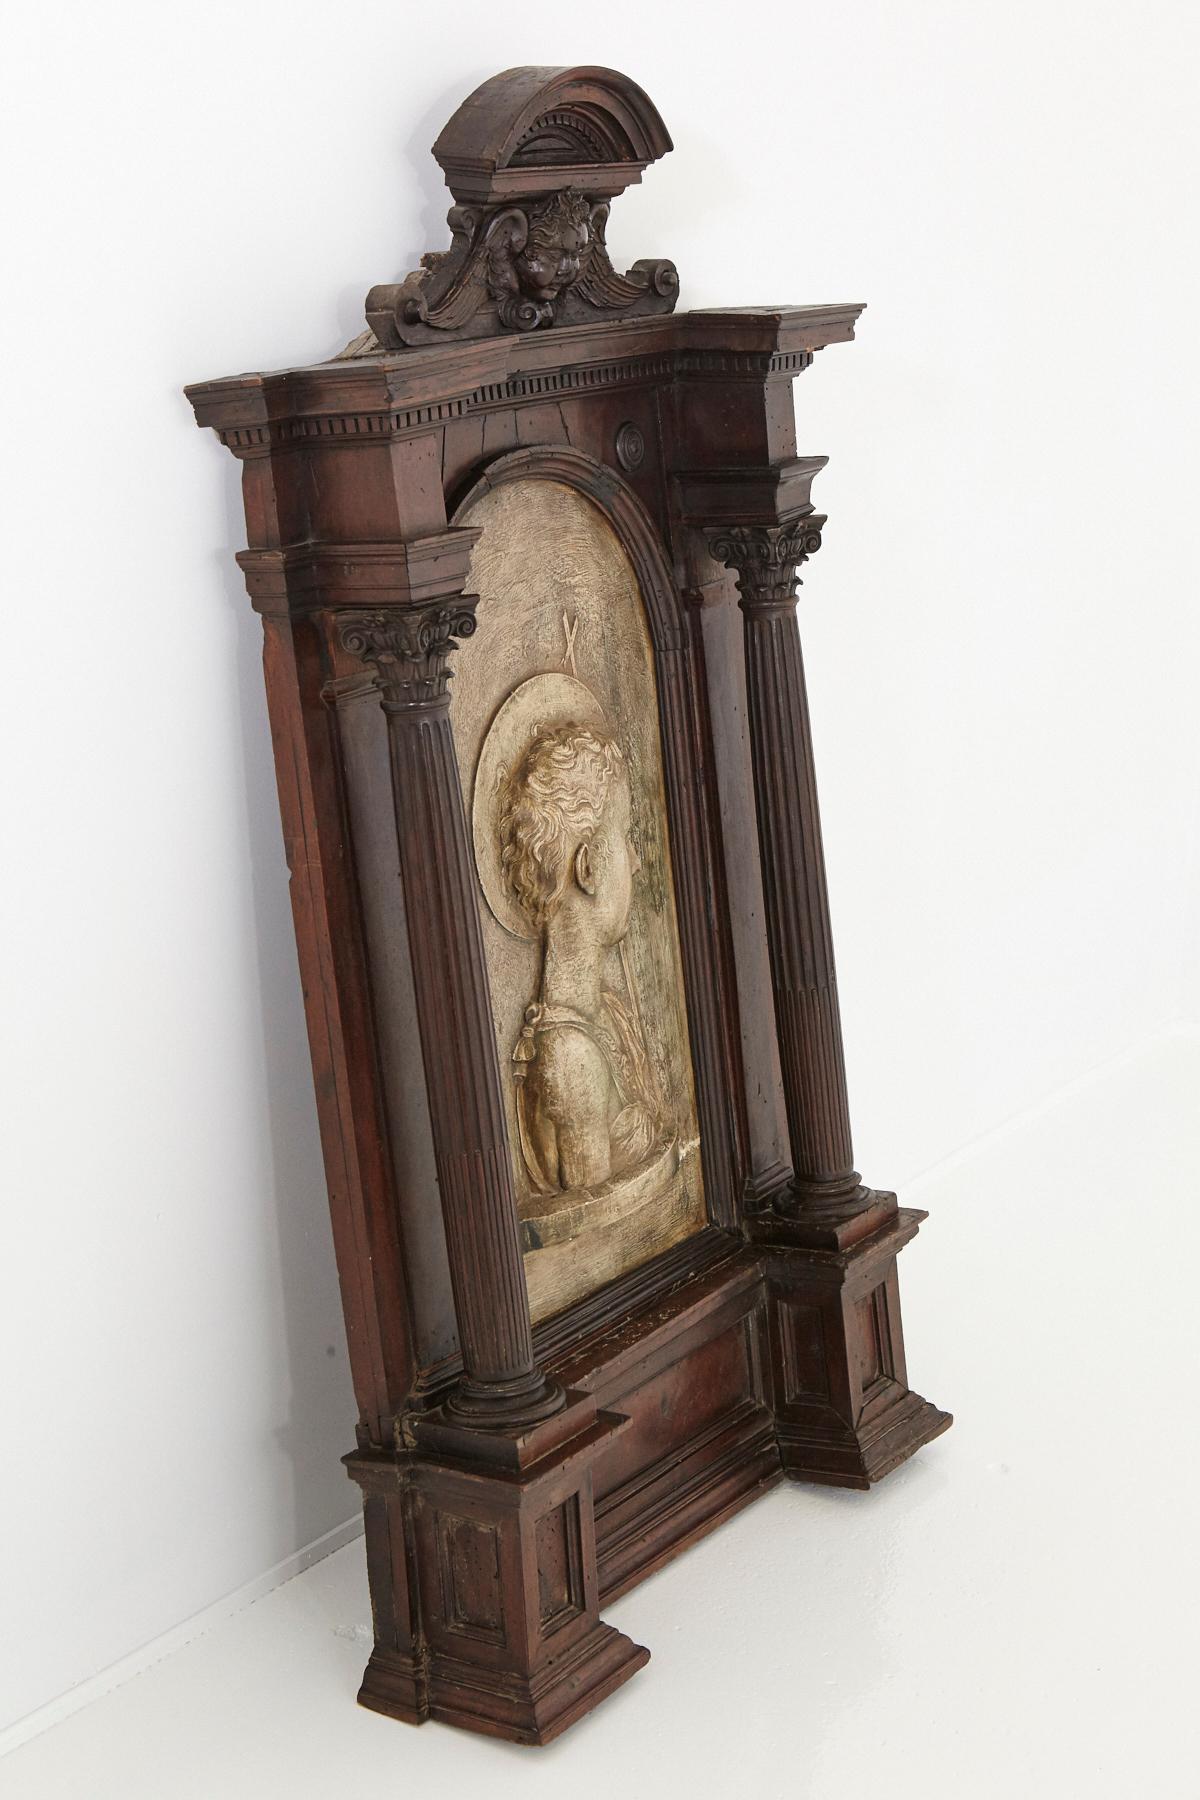 Hand-Carved Large Sculptural Italian Baroque Tabernacle Frame, Late 18th Century For Sale